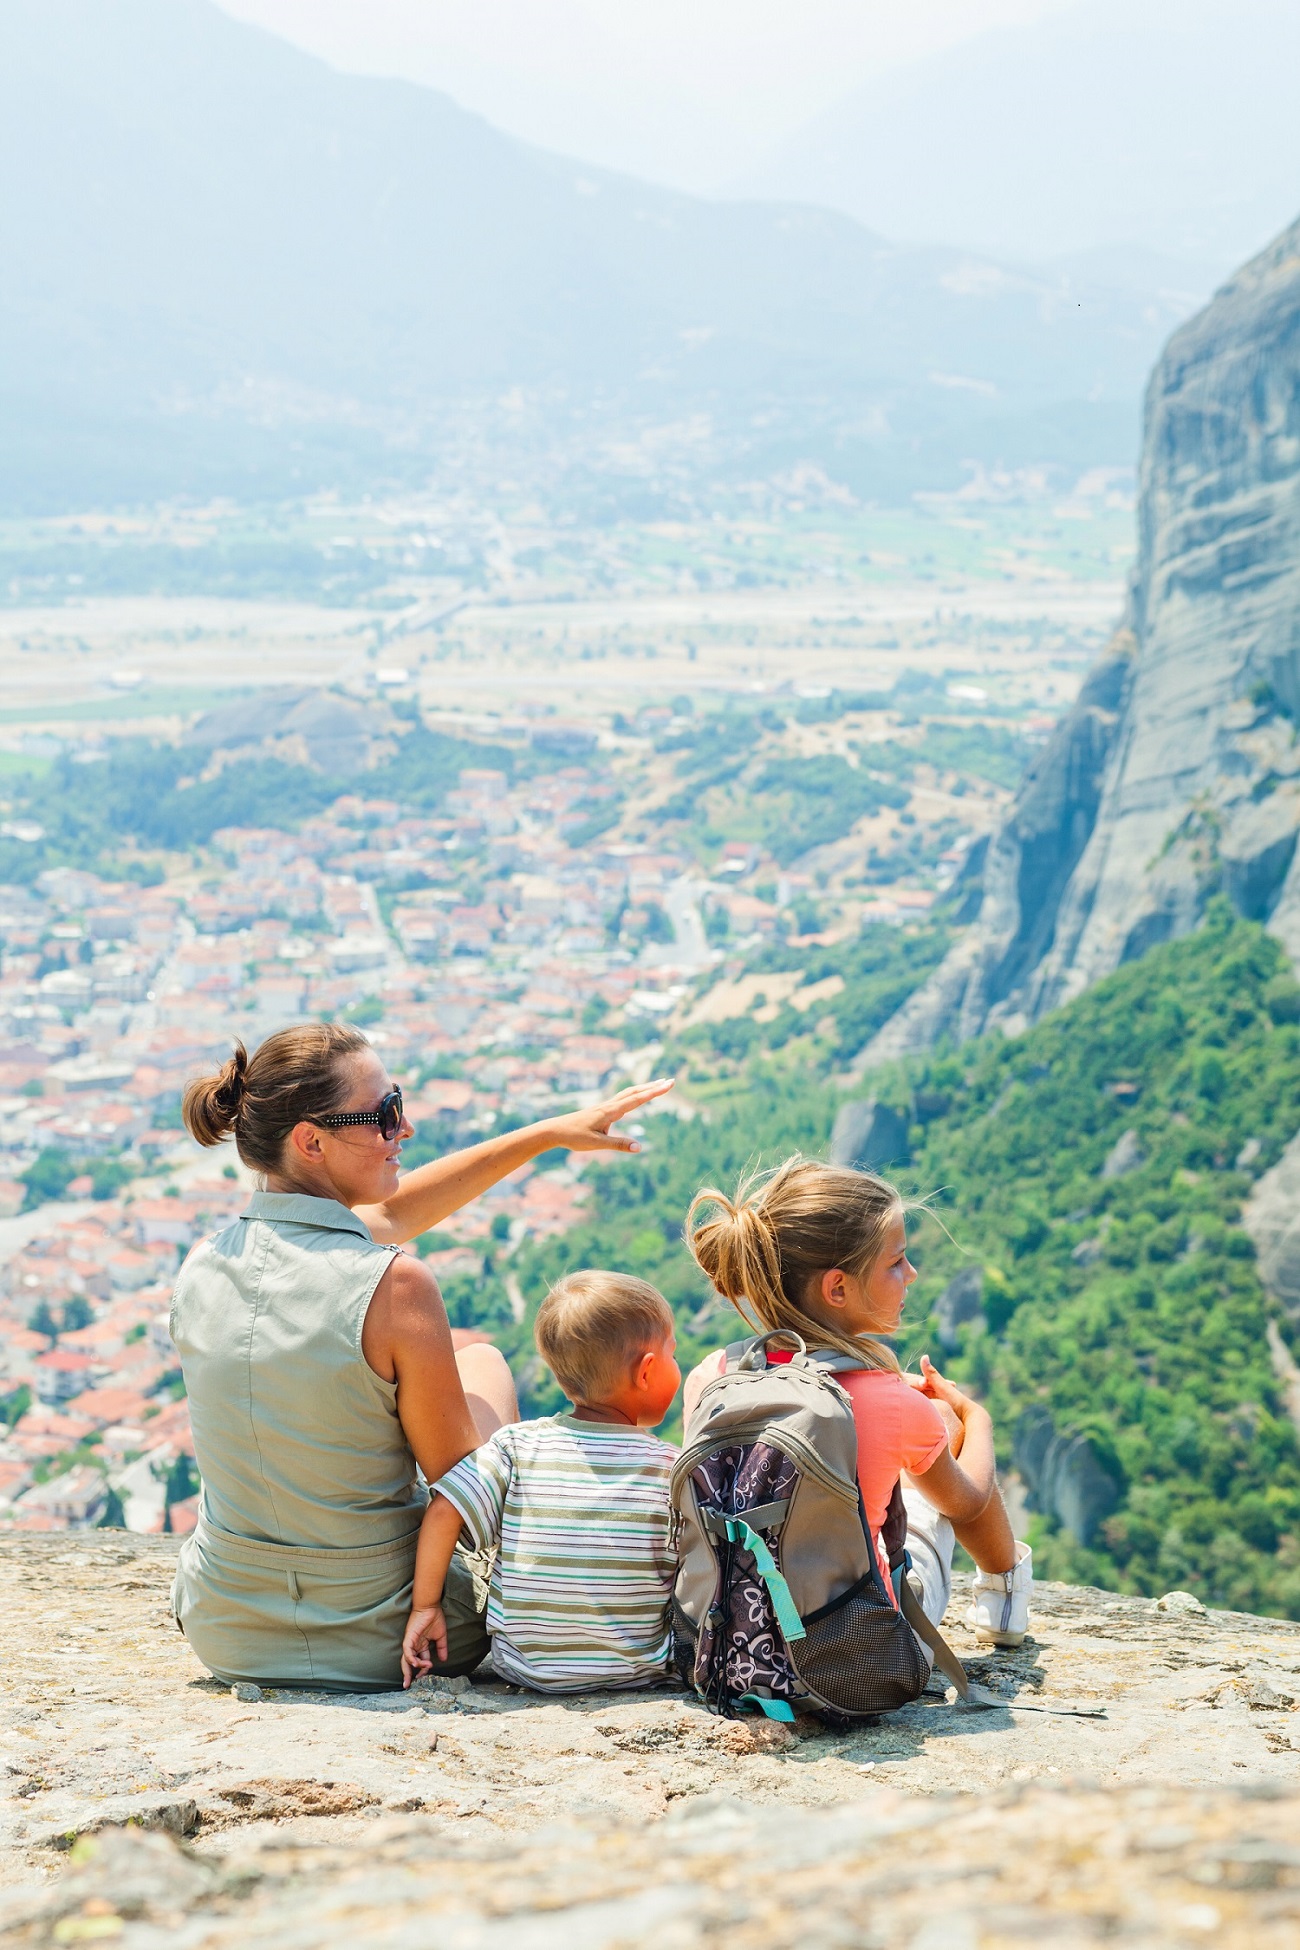 mother-and-her-kids-looking-at-the-town-of-kalambaka-bird-s-eye-view-vertical-view-meteora-greece.jpg